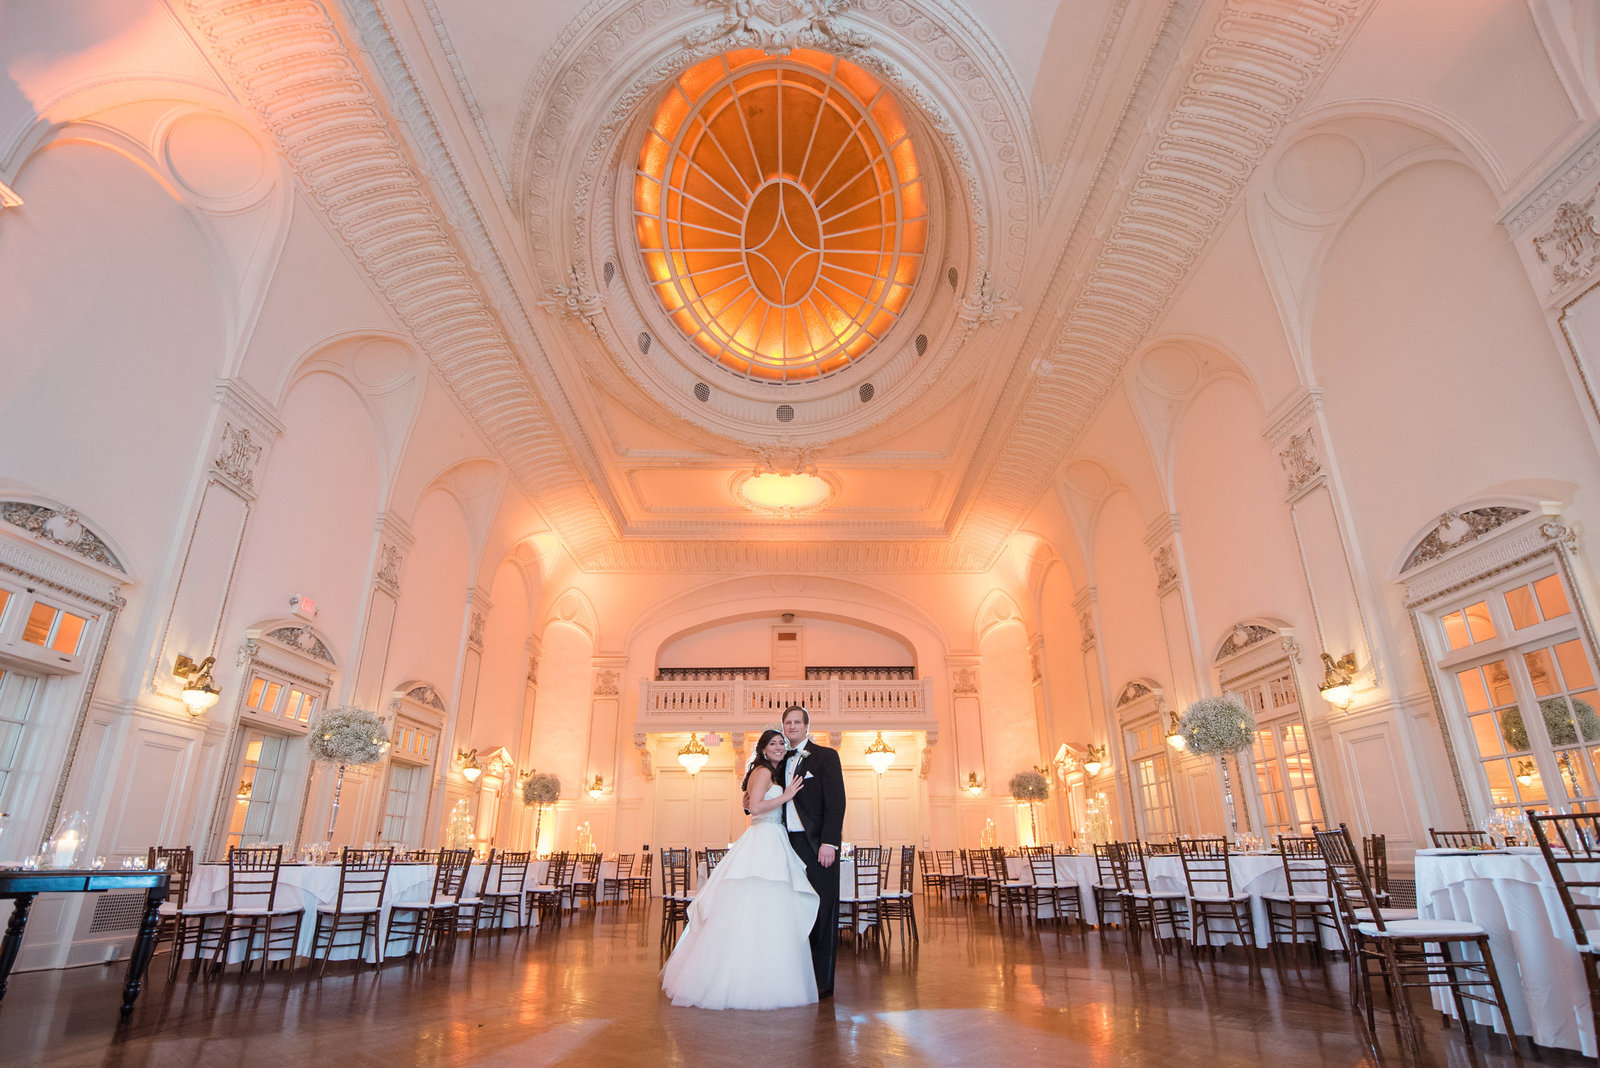 Bride and groom at the ball room of the Bourne Mansion